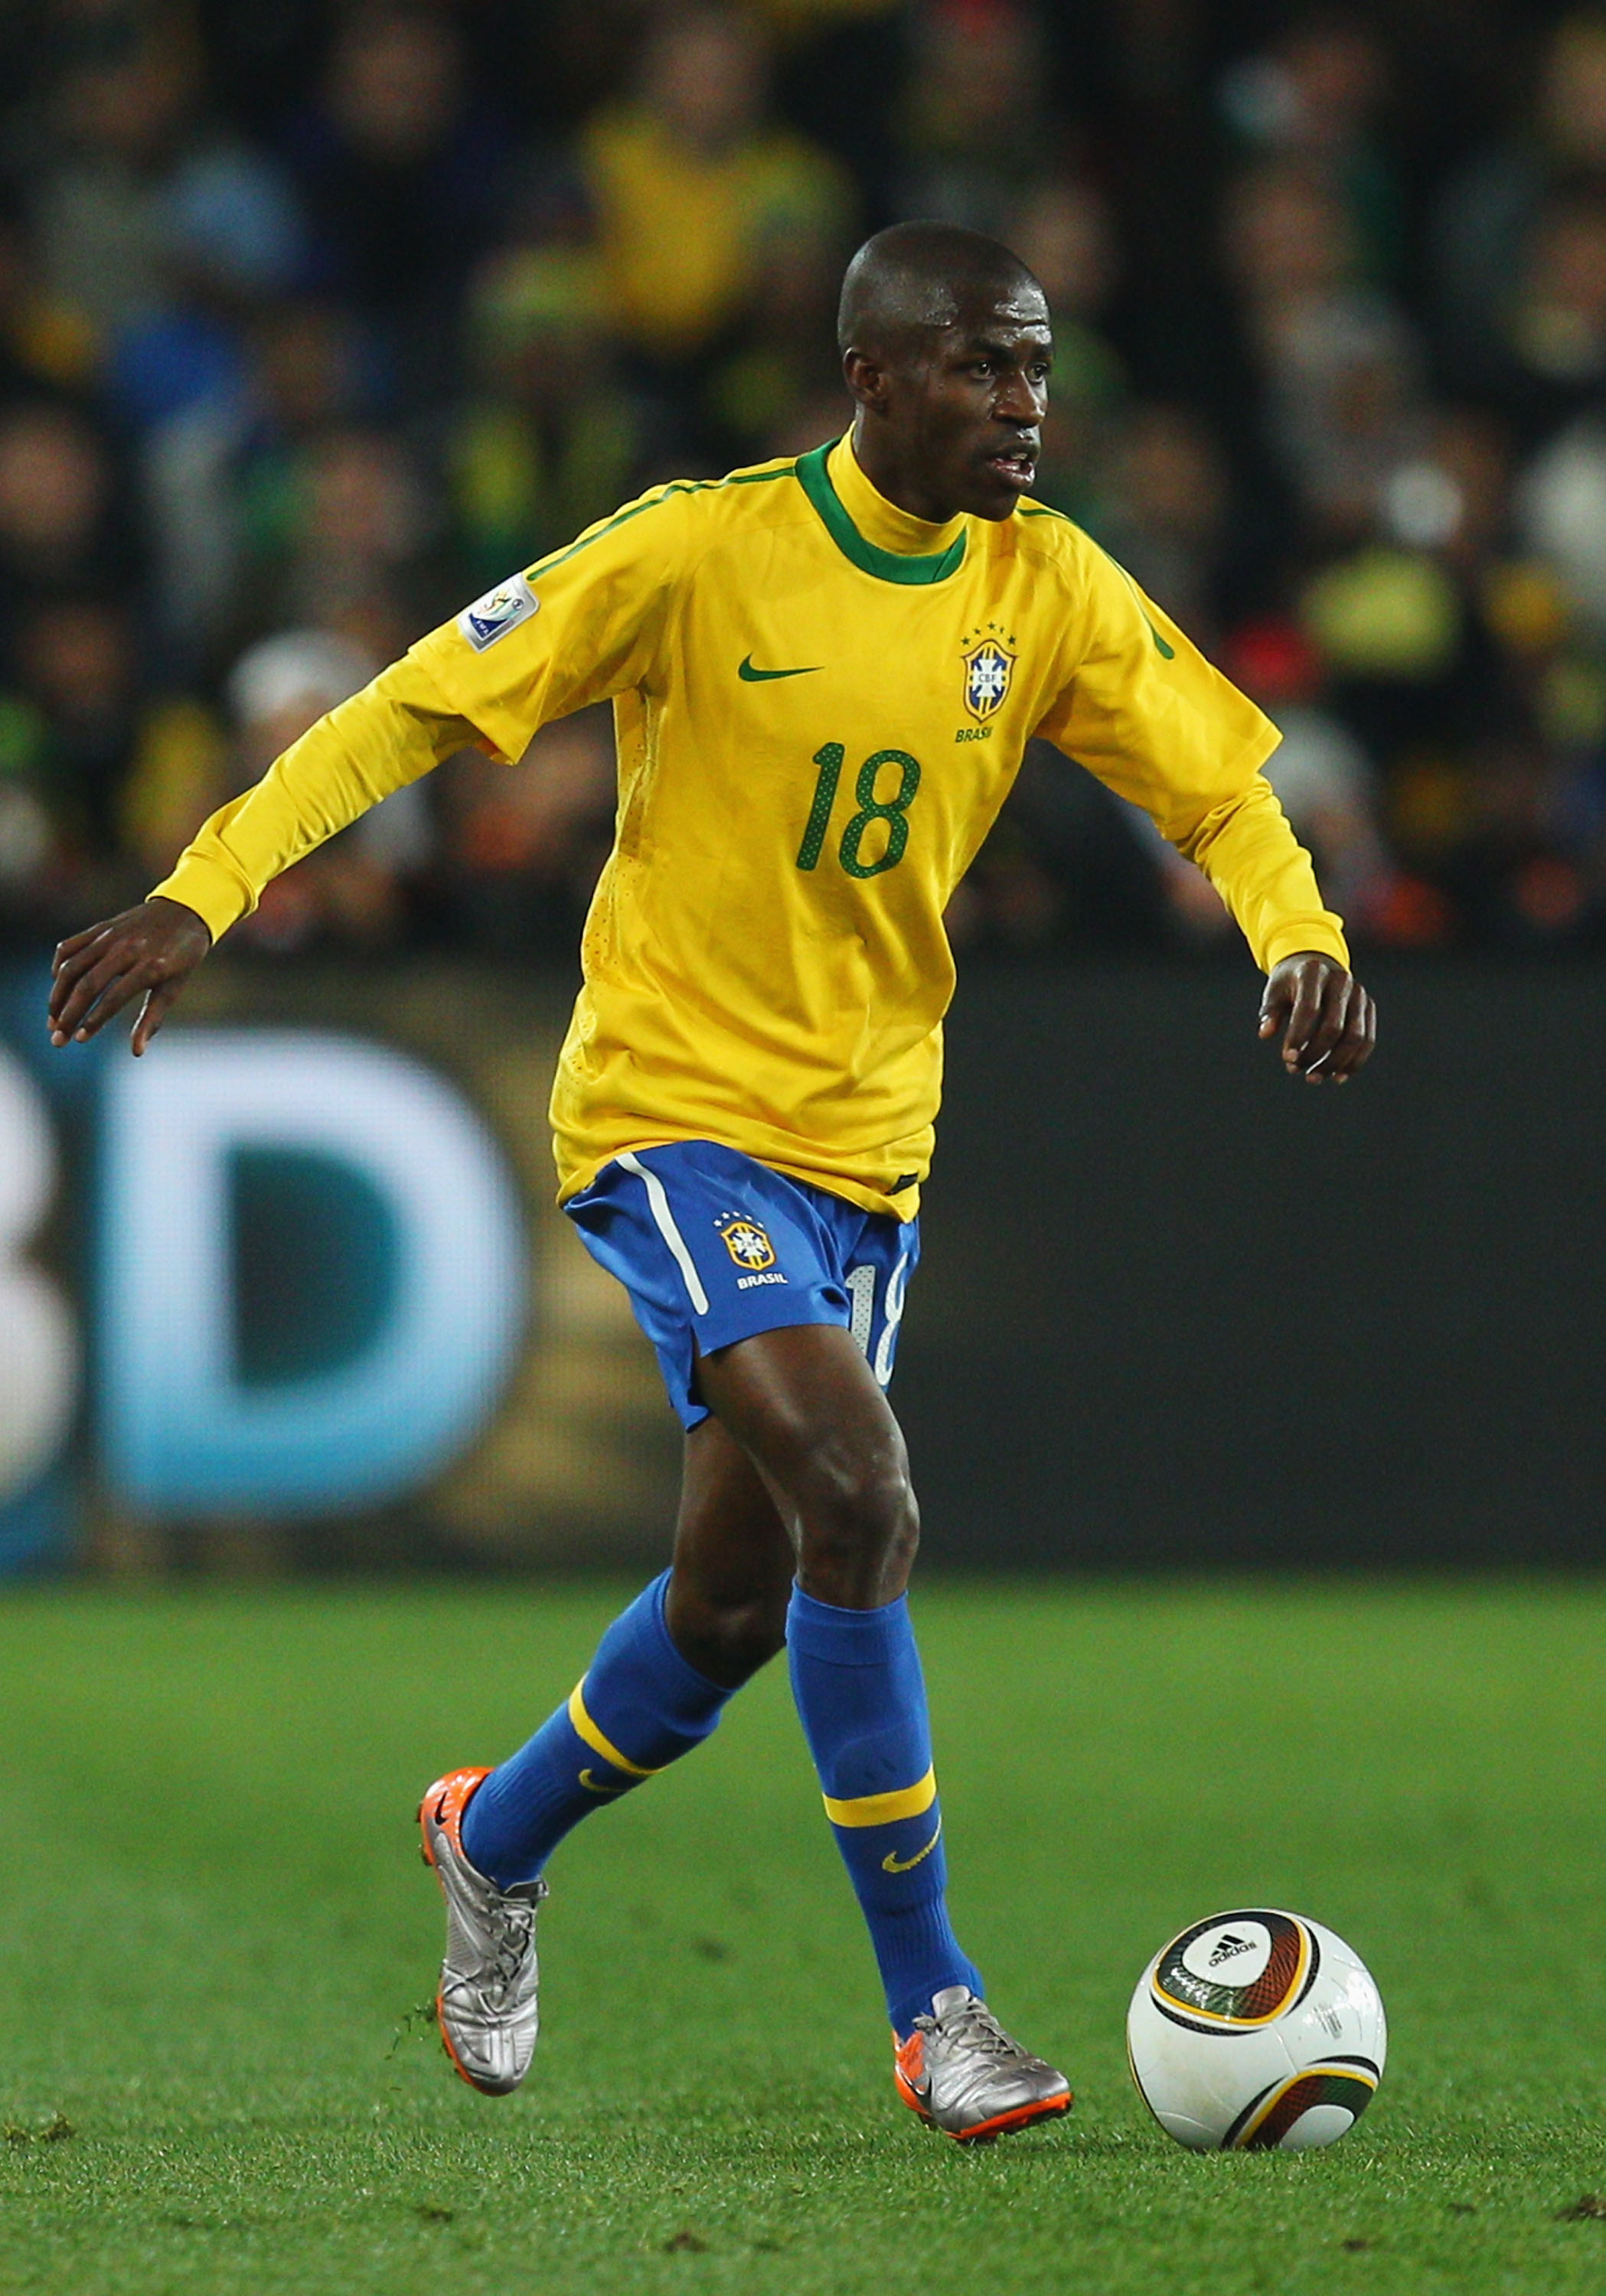 JOHANNESBURG, SOUTH AFRICA - JUNE 28:  Ramires of Brazil runs with the ball during the 2010 FIFA World Cup South Africa Round of Sixteen match between Brazil and Chile at Ellis Park Stadium on June 28, 2010 in Johannesburg, South Africa.  (Photo by Camero